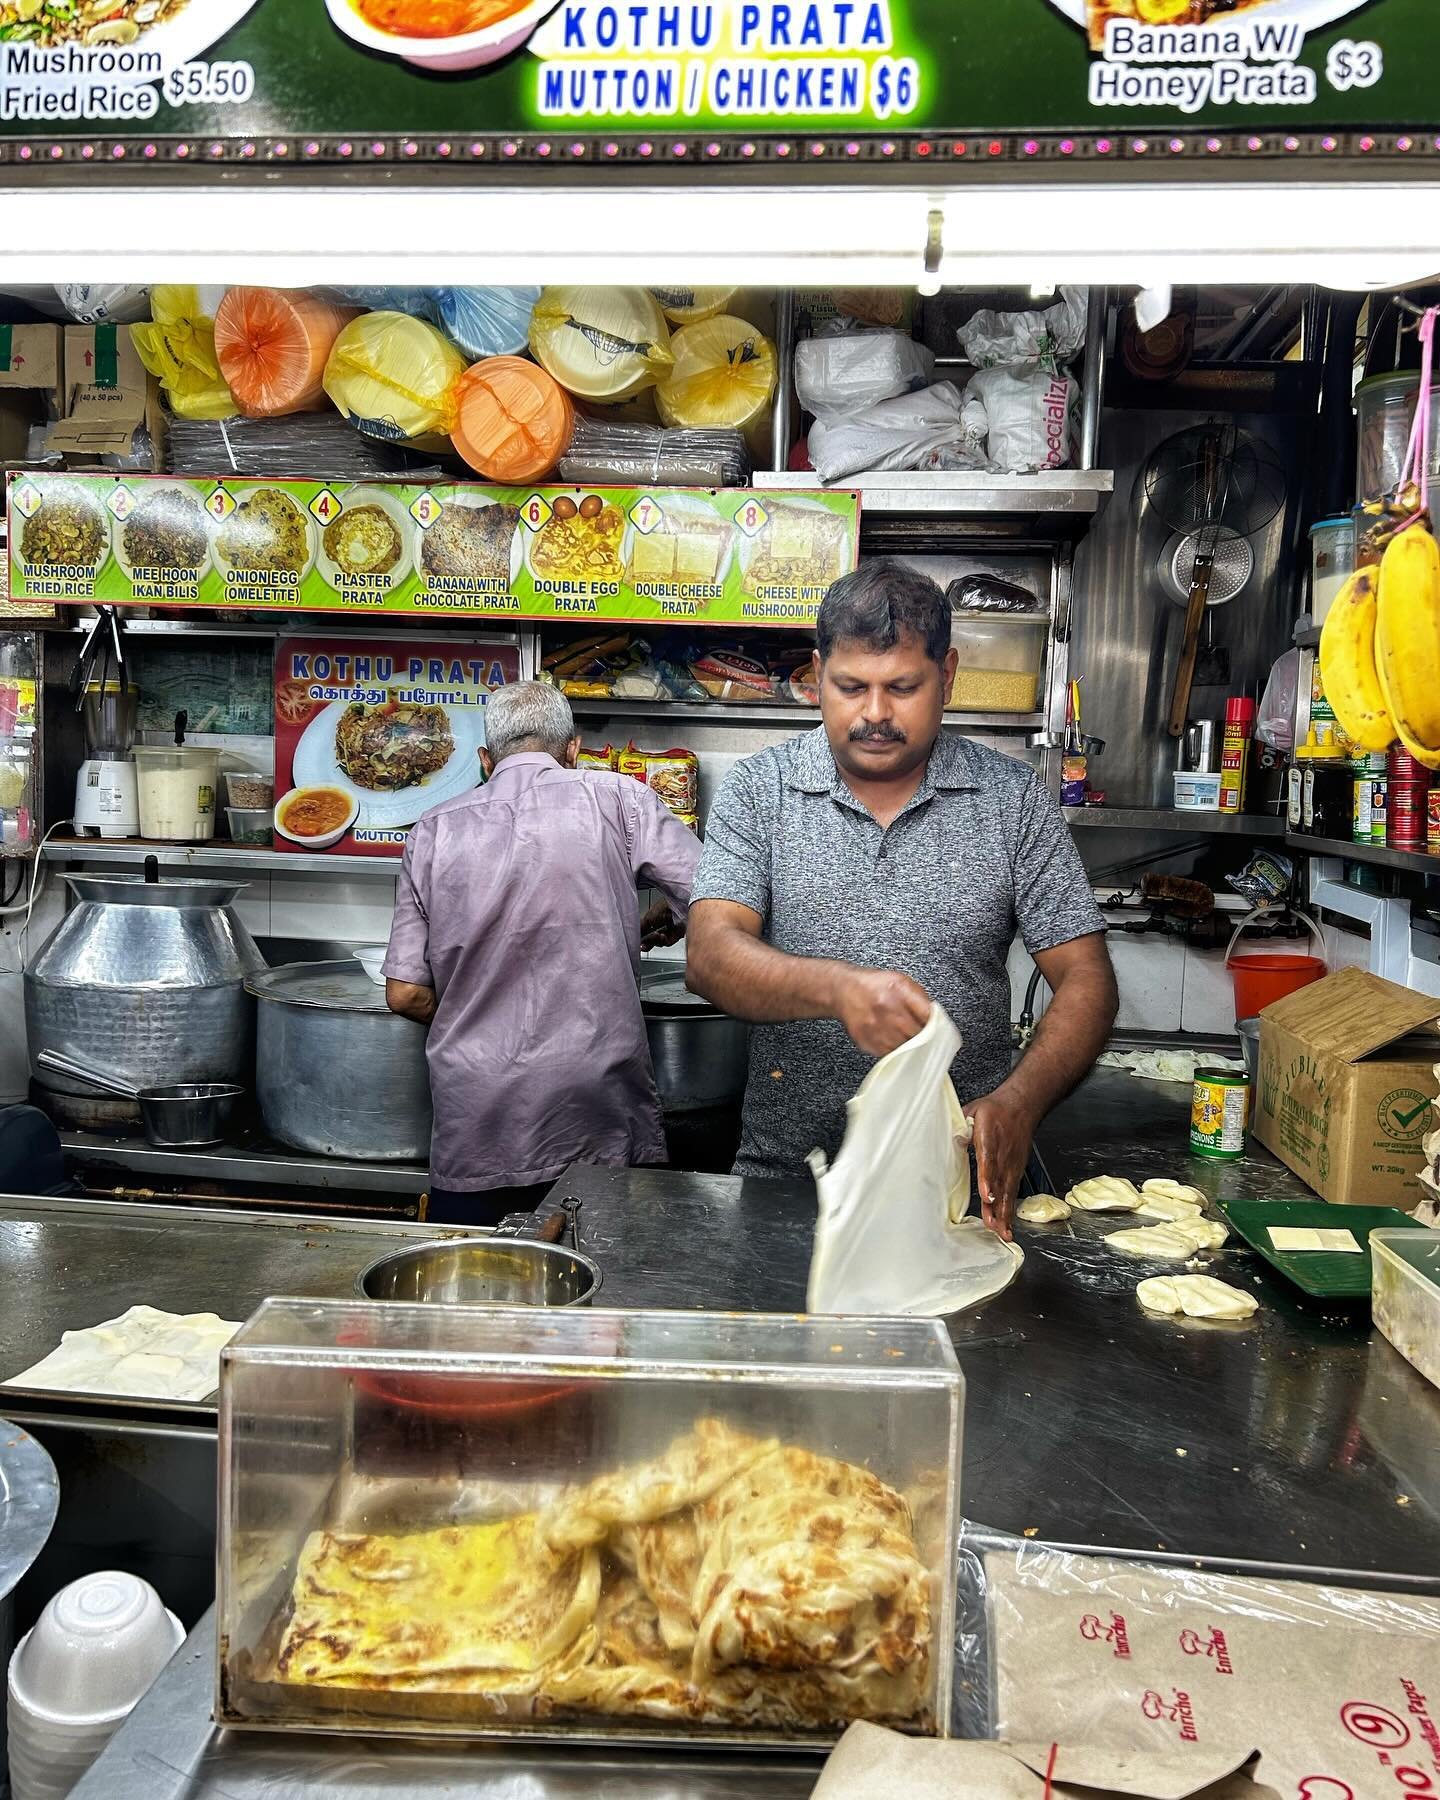 #singapore You can&rsquo;t go to Singapore without visiting one of their Hawker centres! Kids liked cheese prata, naan breads, coconut juice and sugar cane juice from Tekka Centre. We liked the chicken curry and gravy that came with the pratas. We wi